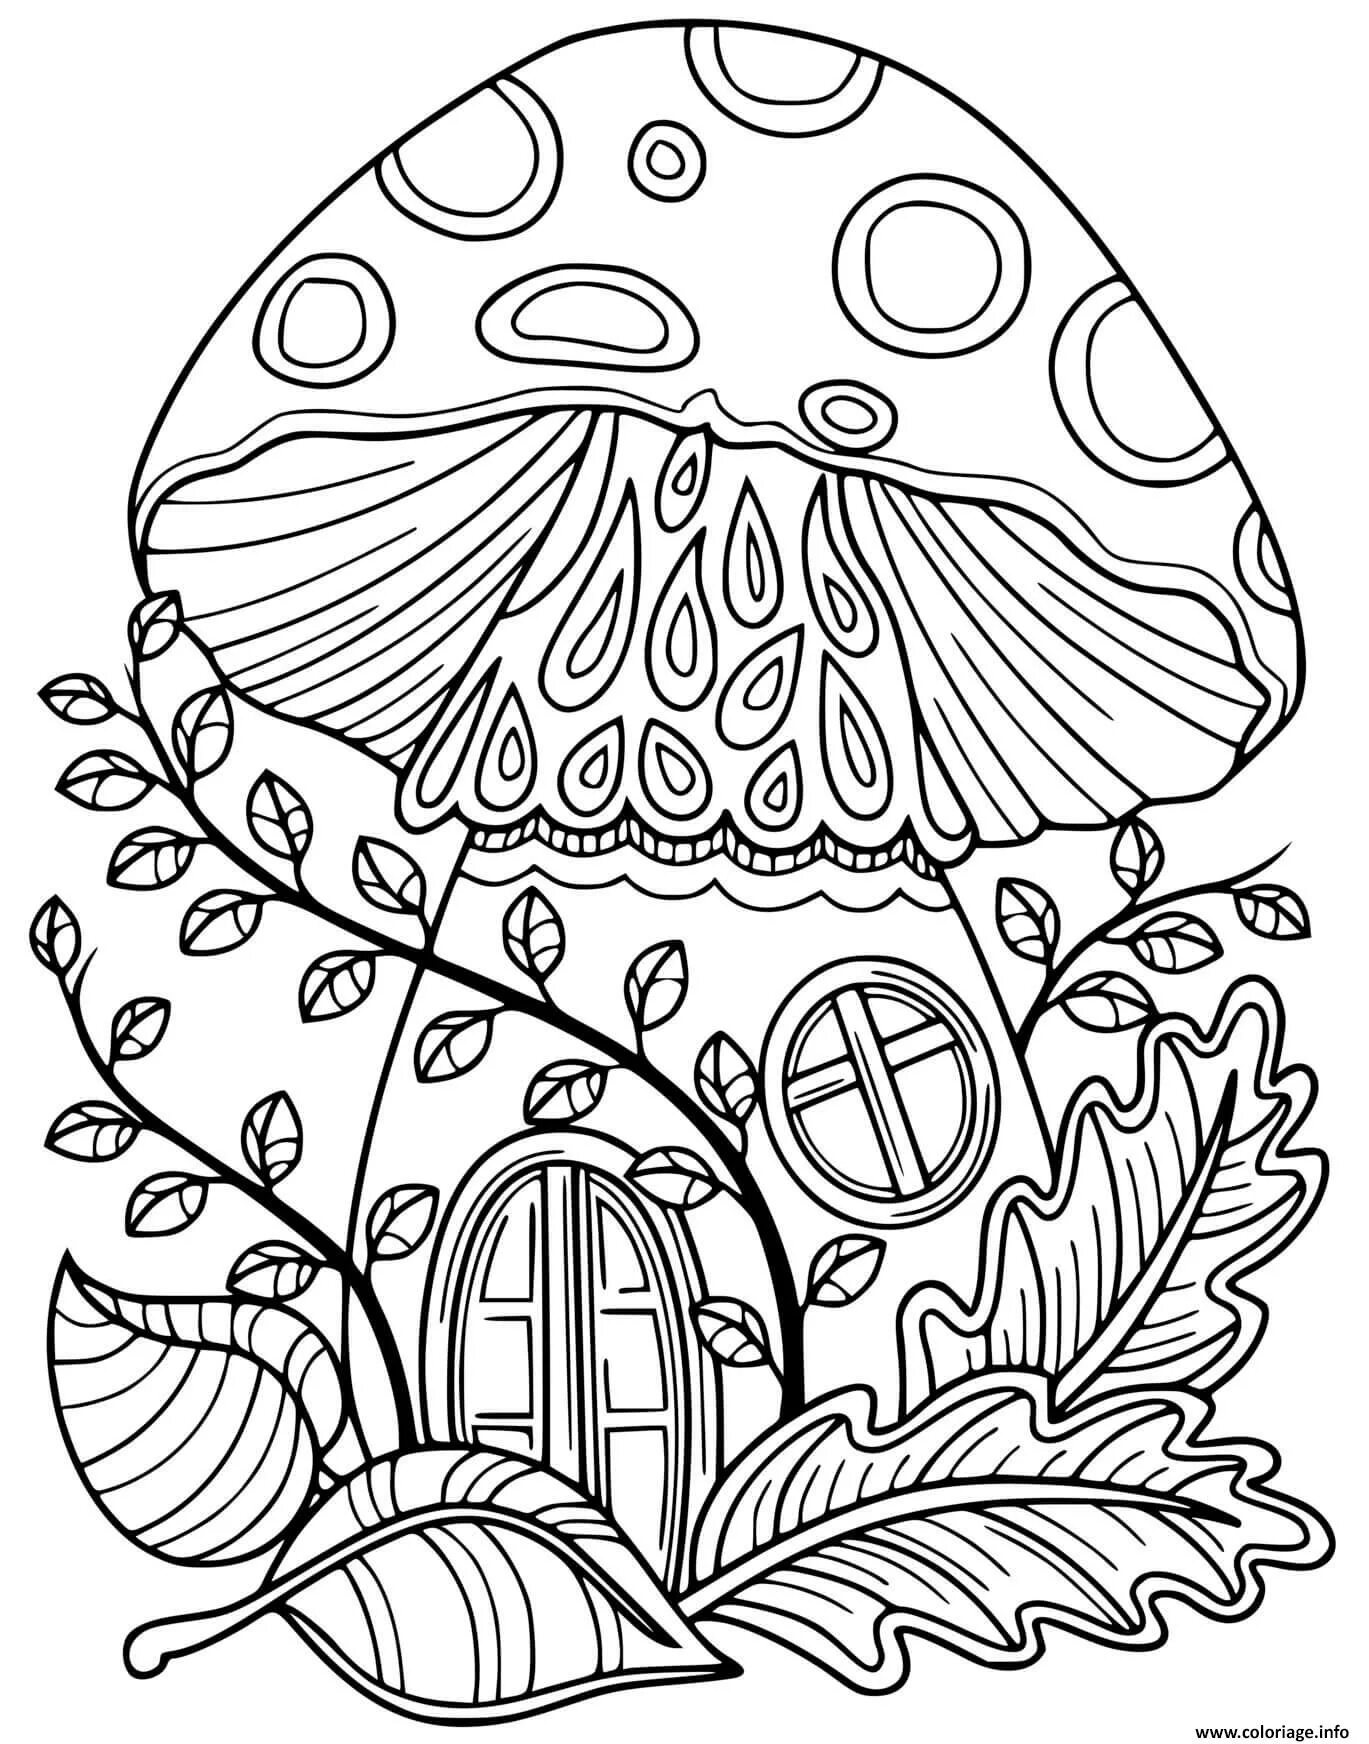 Magic relaxation coloring book for kids